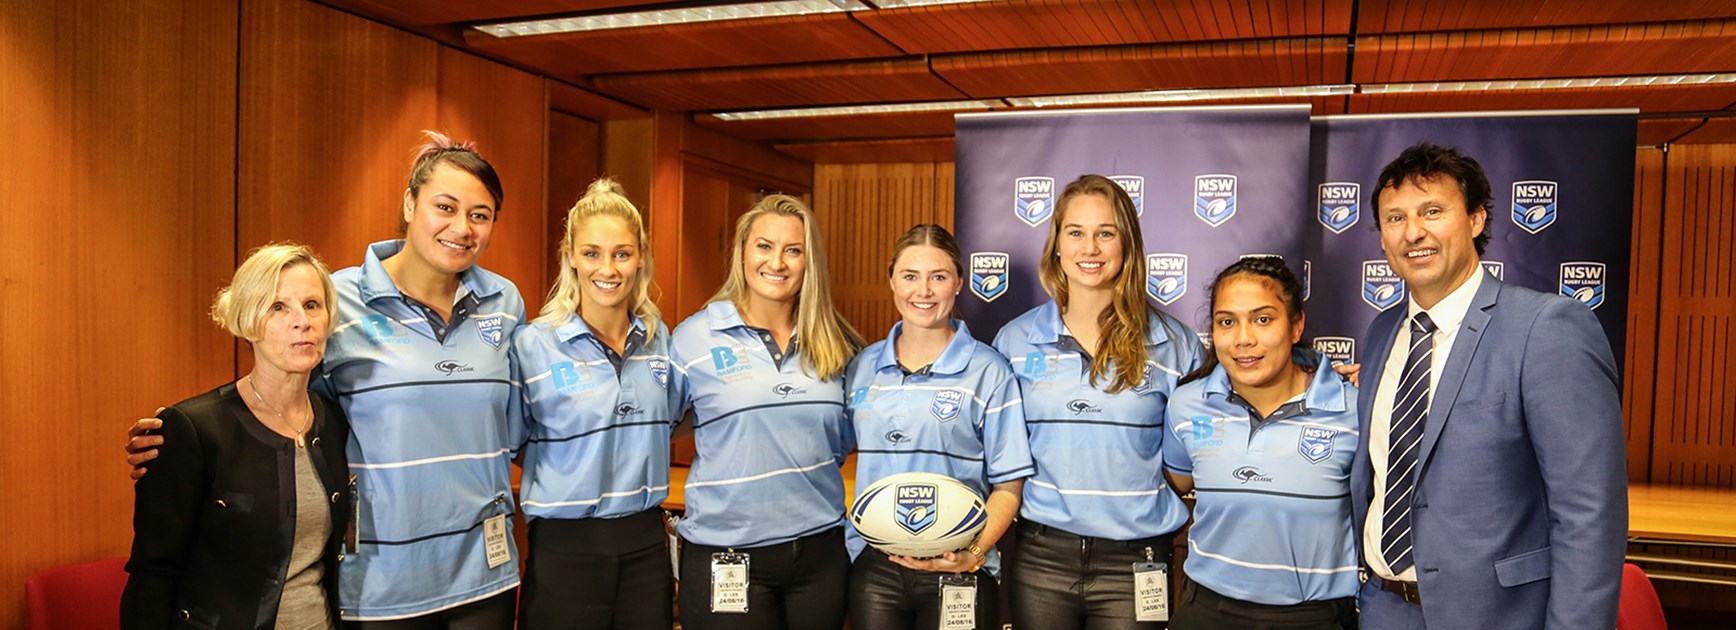 Members of the NSW women's rugby league team at a NSW Parliamentary Reception celebrating Women in League.